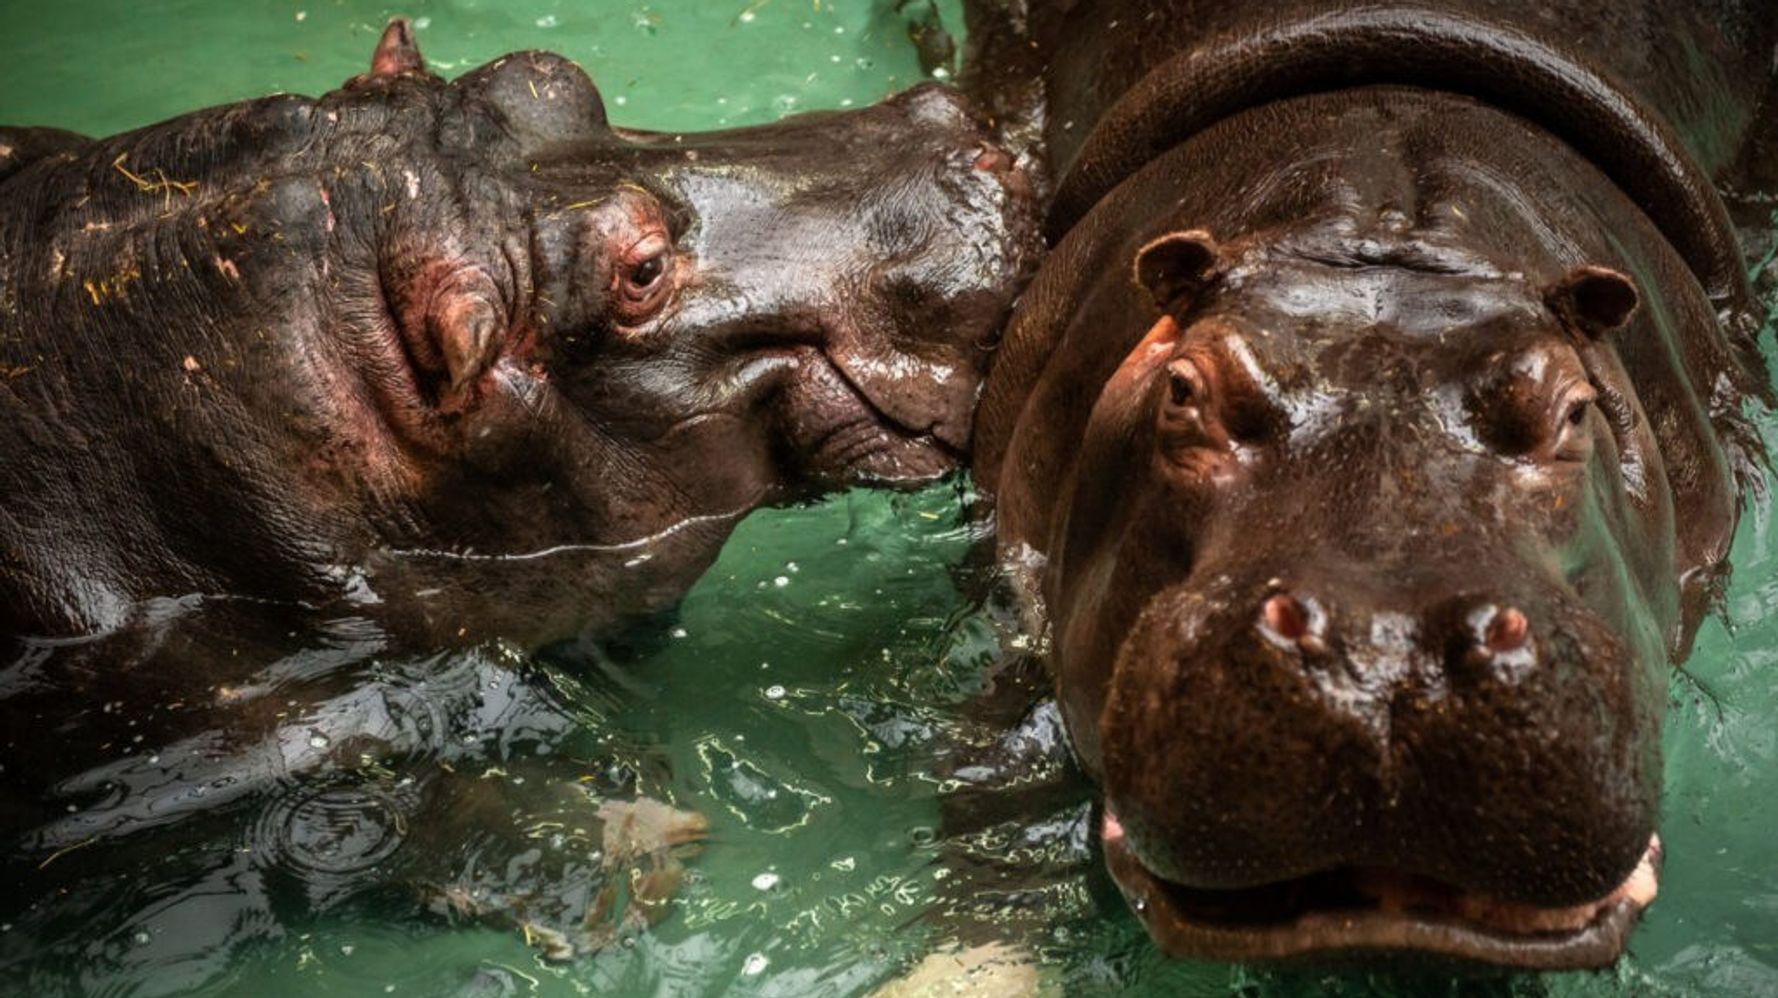 Pair Of Belgium Zoo Hippos Get COVID In What May Be First Cases For Species | HuffPost Impact